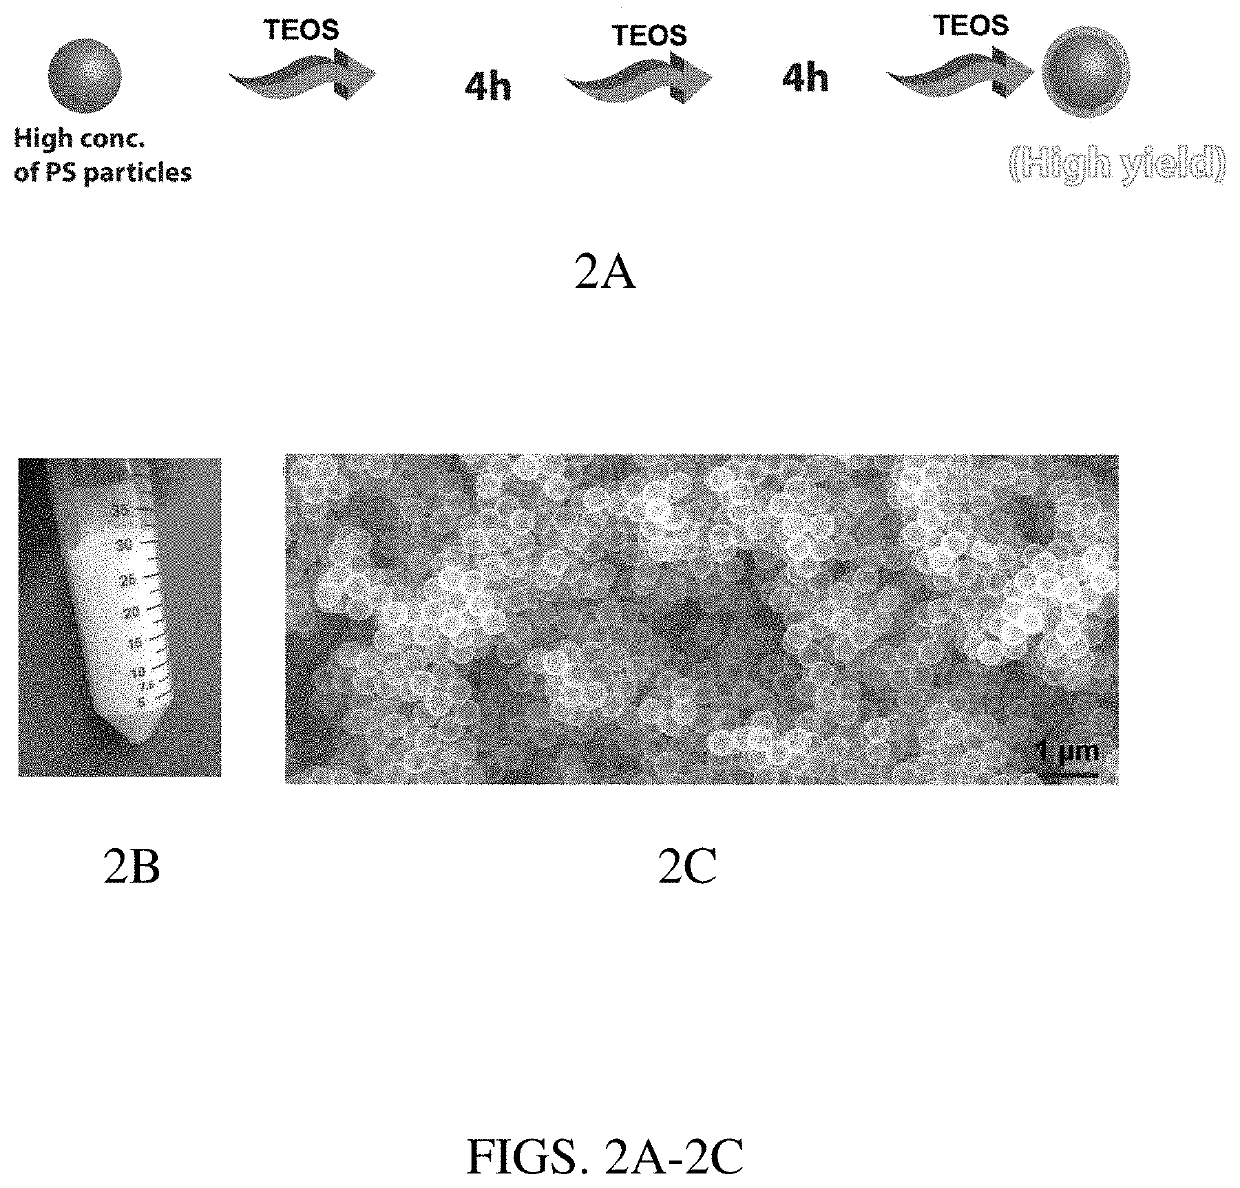 Methods for producing hollow silica particles